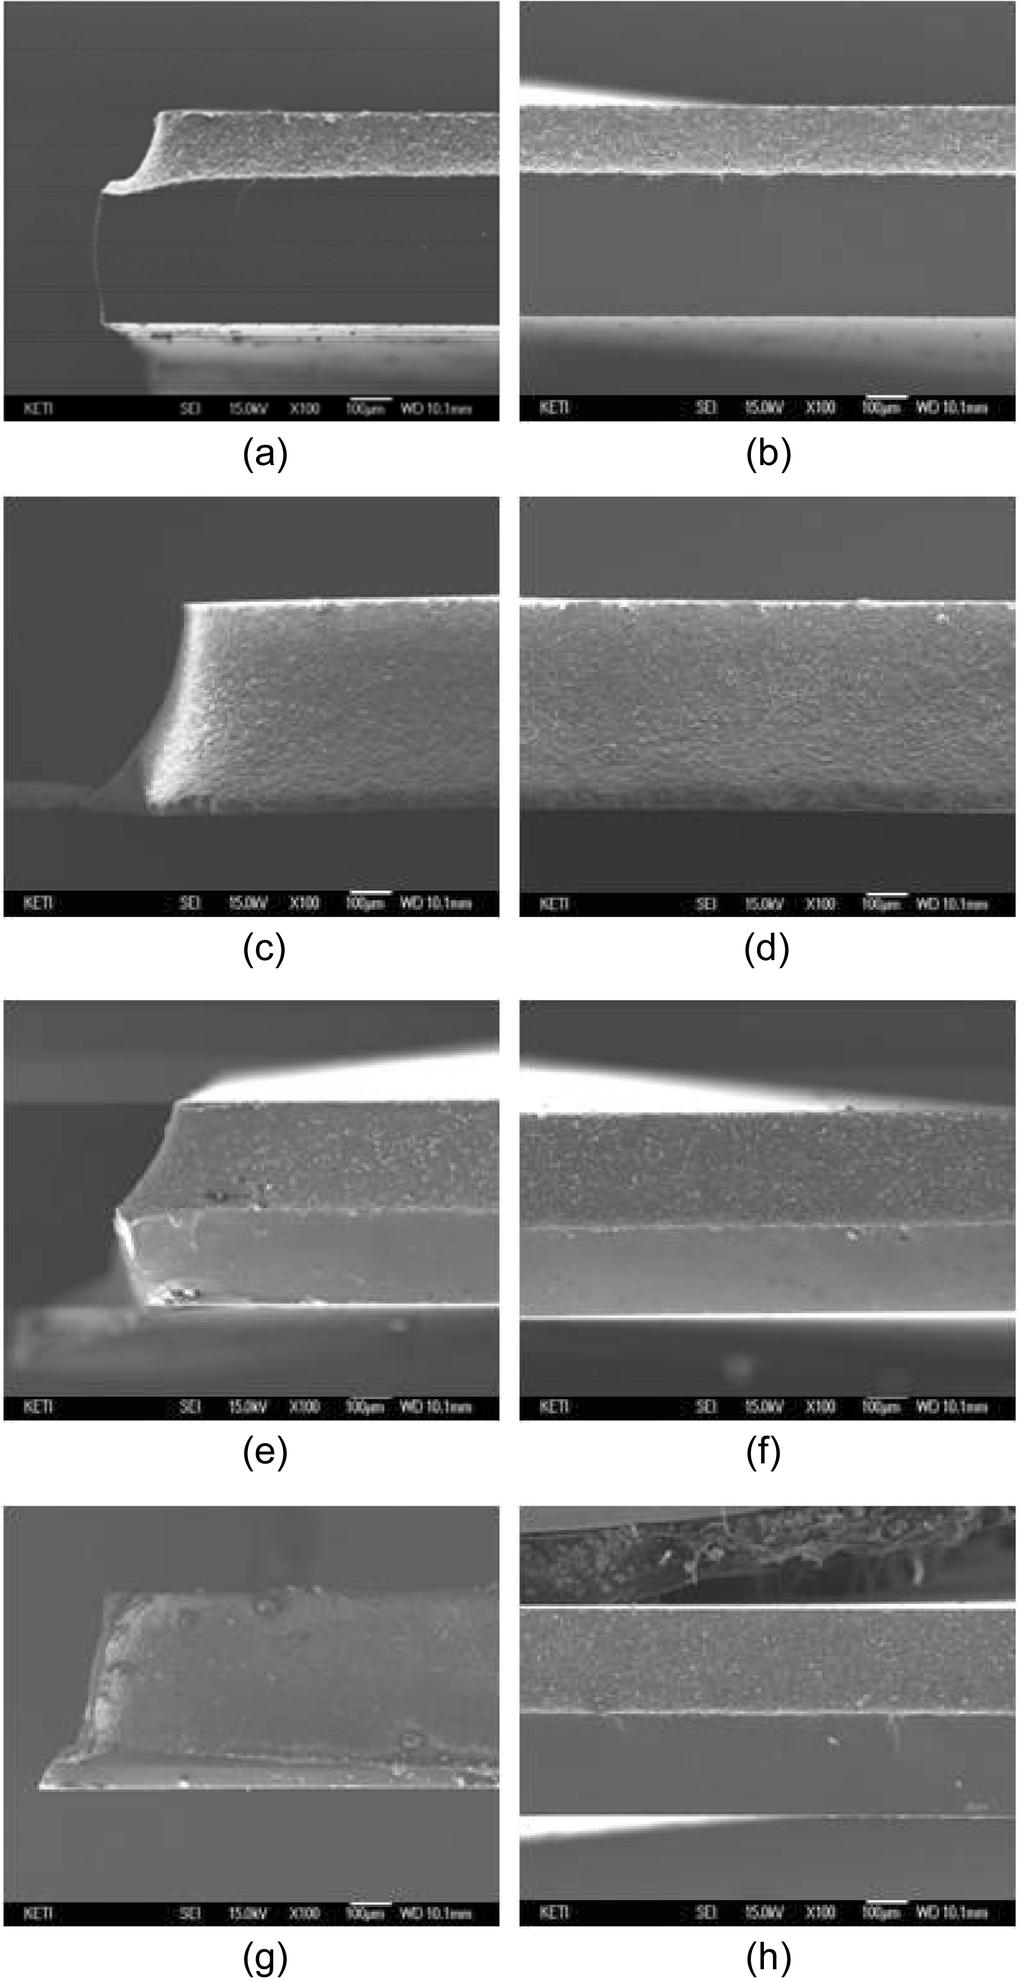 Sand Blast를 이용한 Glass Wafer 절단 가공 최적화 Fig. 5. 33 SEM images of glass wafer section (a) side : 0.1 MPa, 200 rpm, (b) front : 0.1 Mpa, 200 rpm, (c) side : 0.1 MPa, 100 rpm, (d) front : 0.